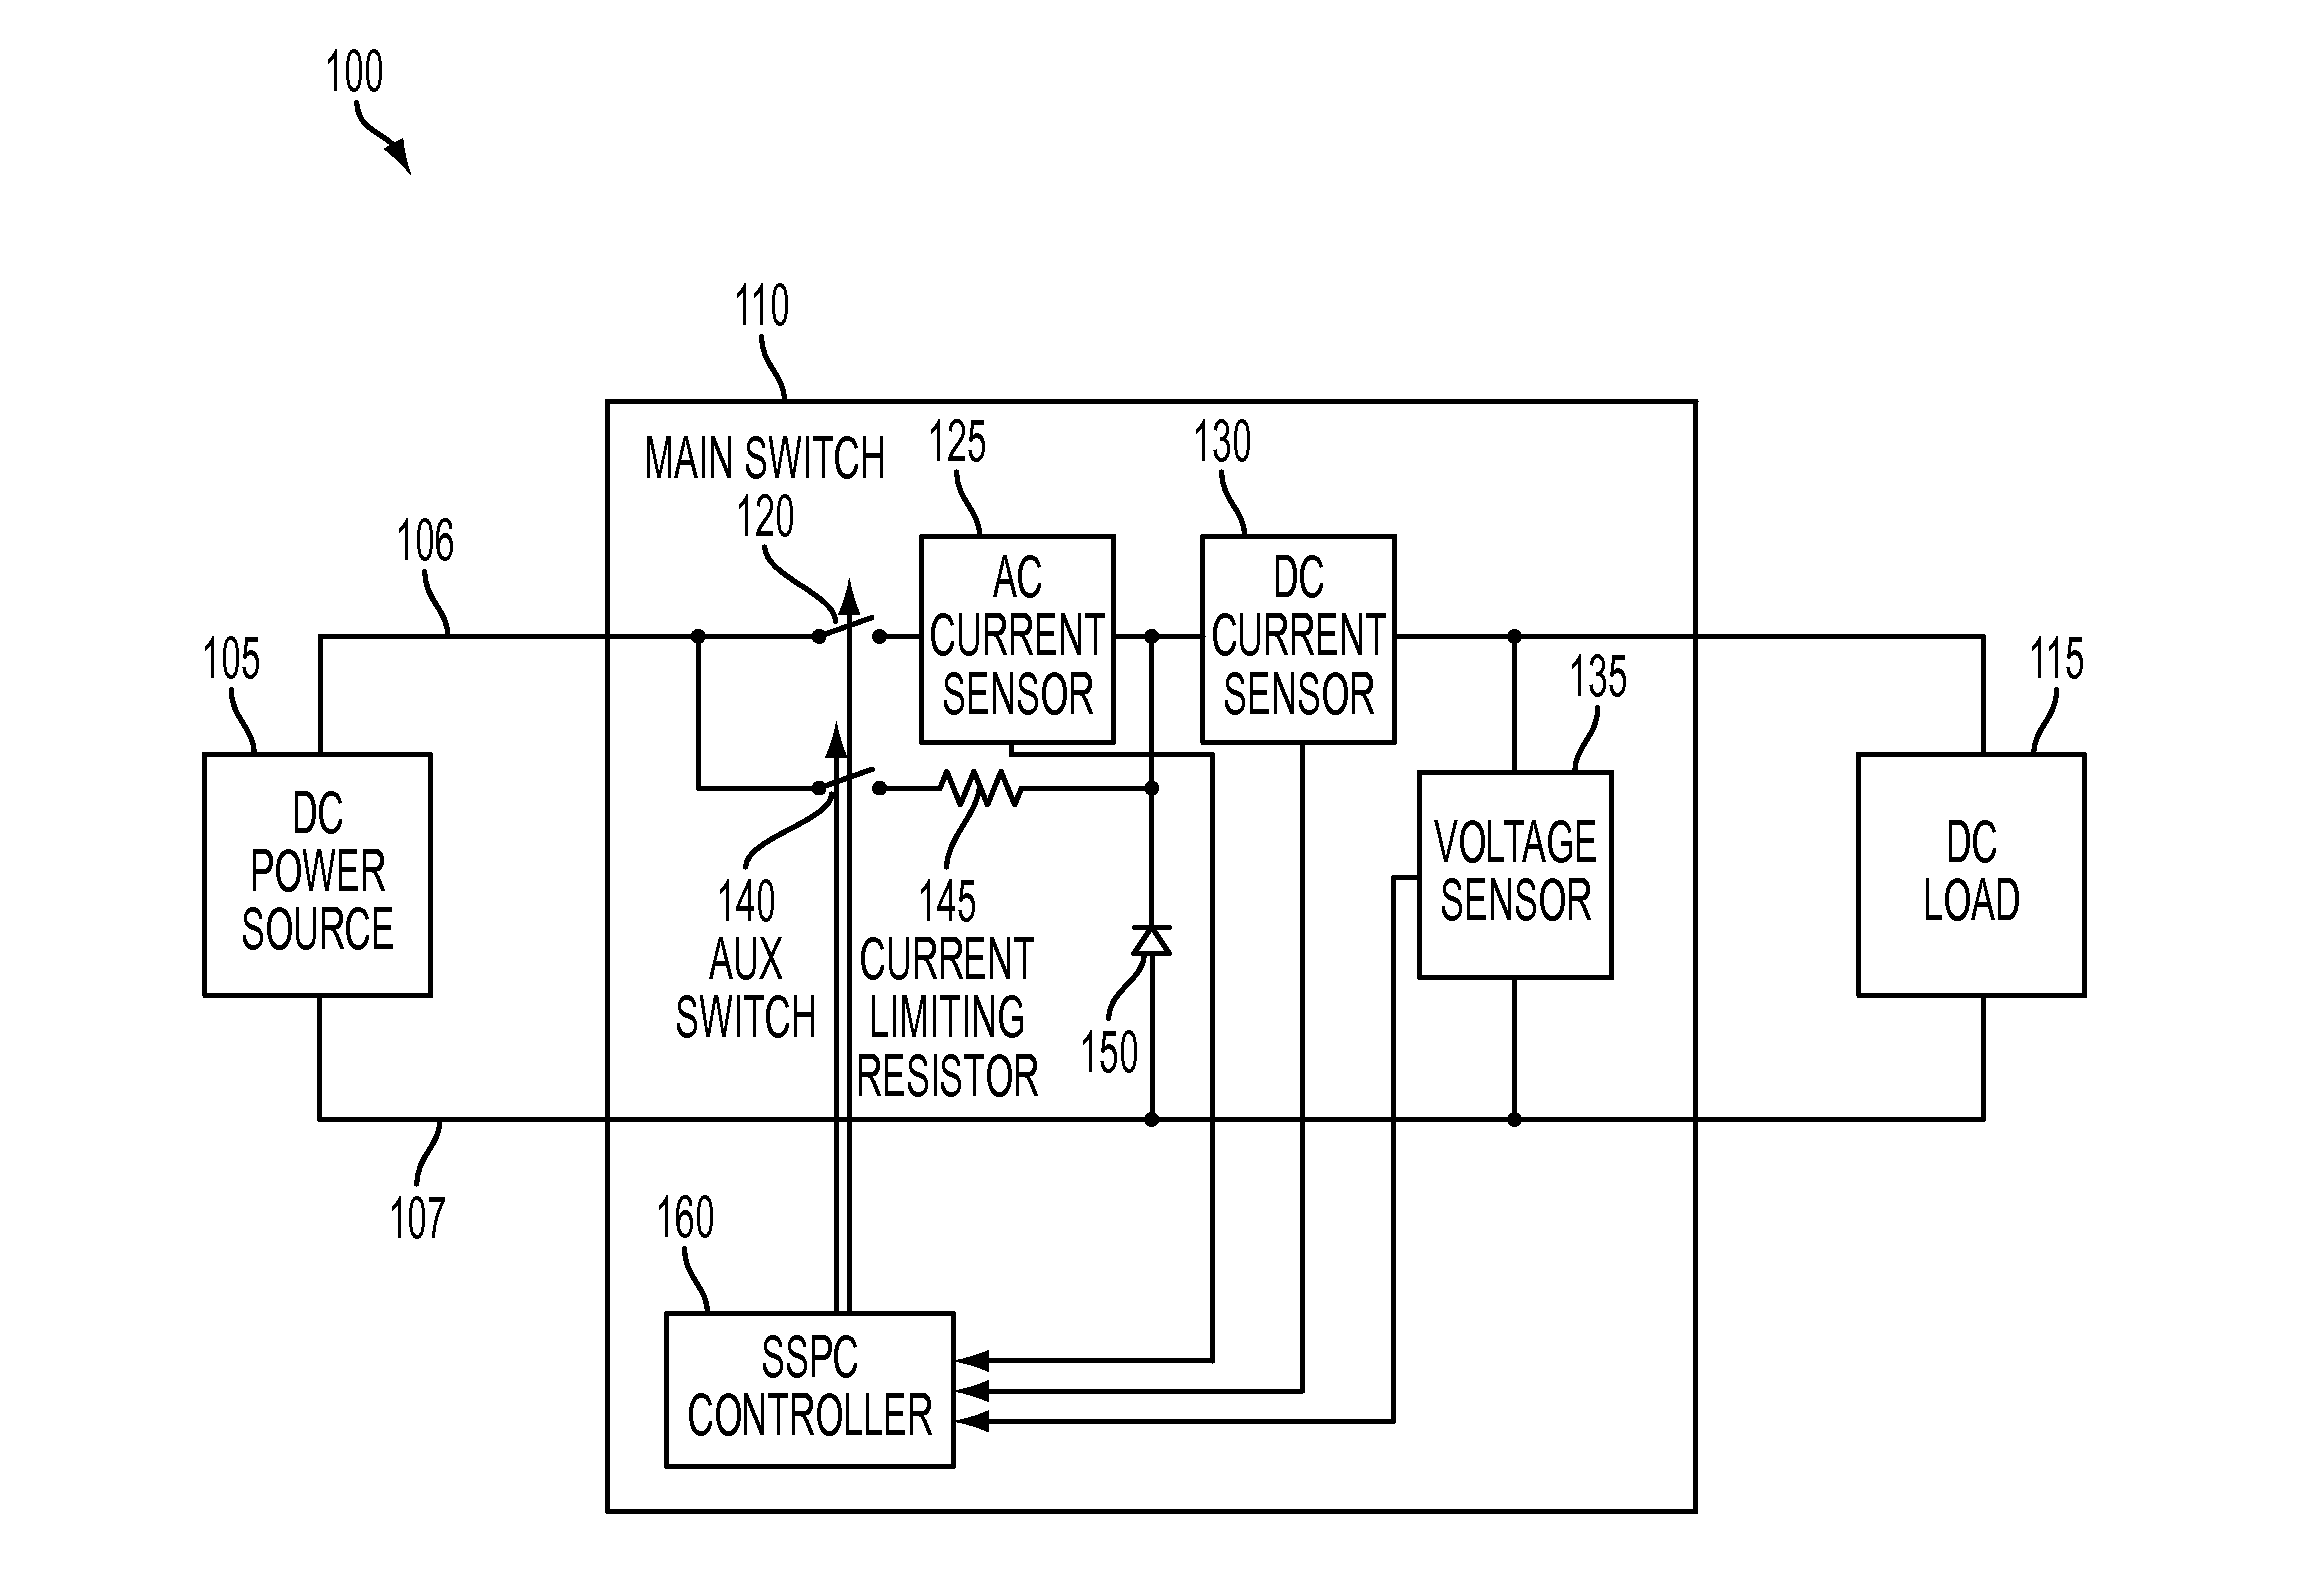 Solid state power controller for high voltage direct current systems